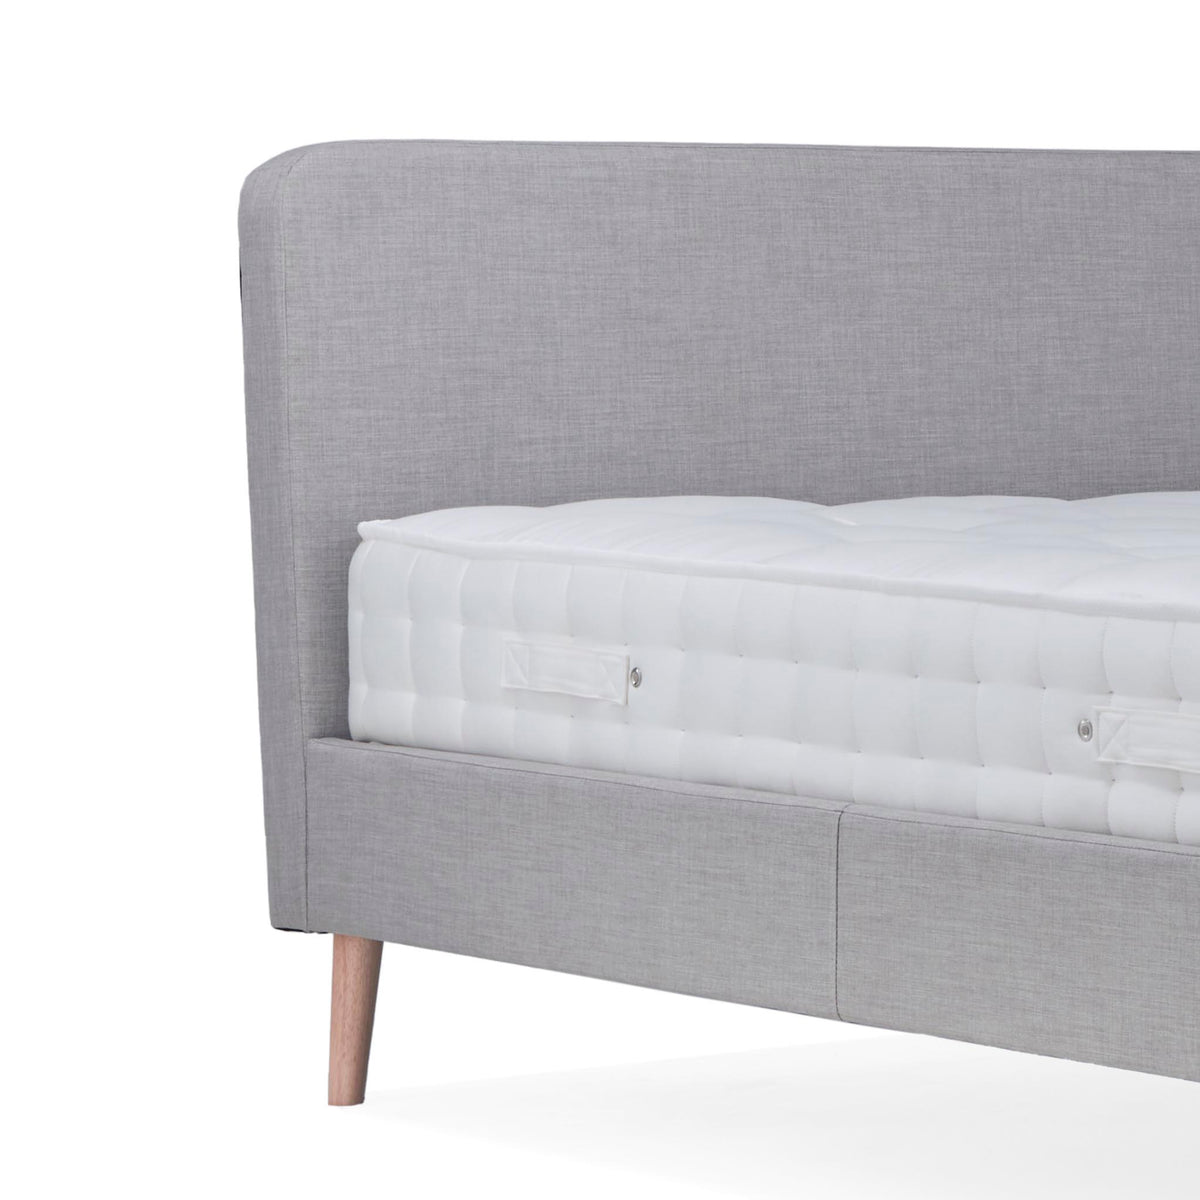 Otto Light Grey Upholstered Bed Frame - headboard close up